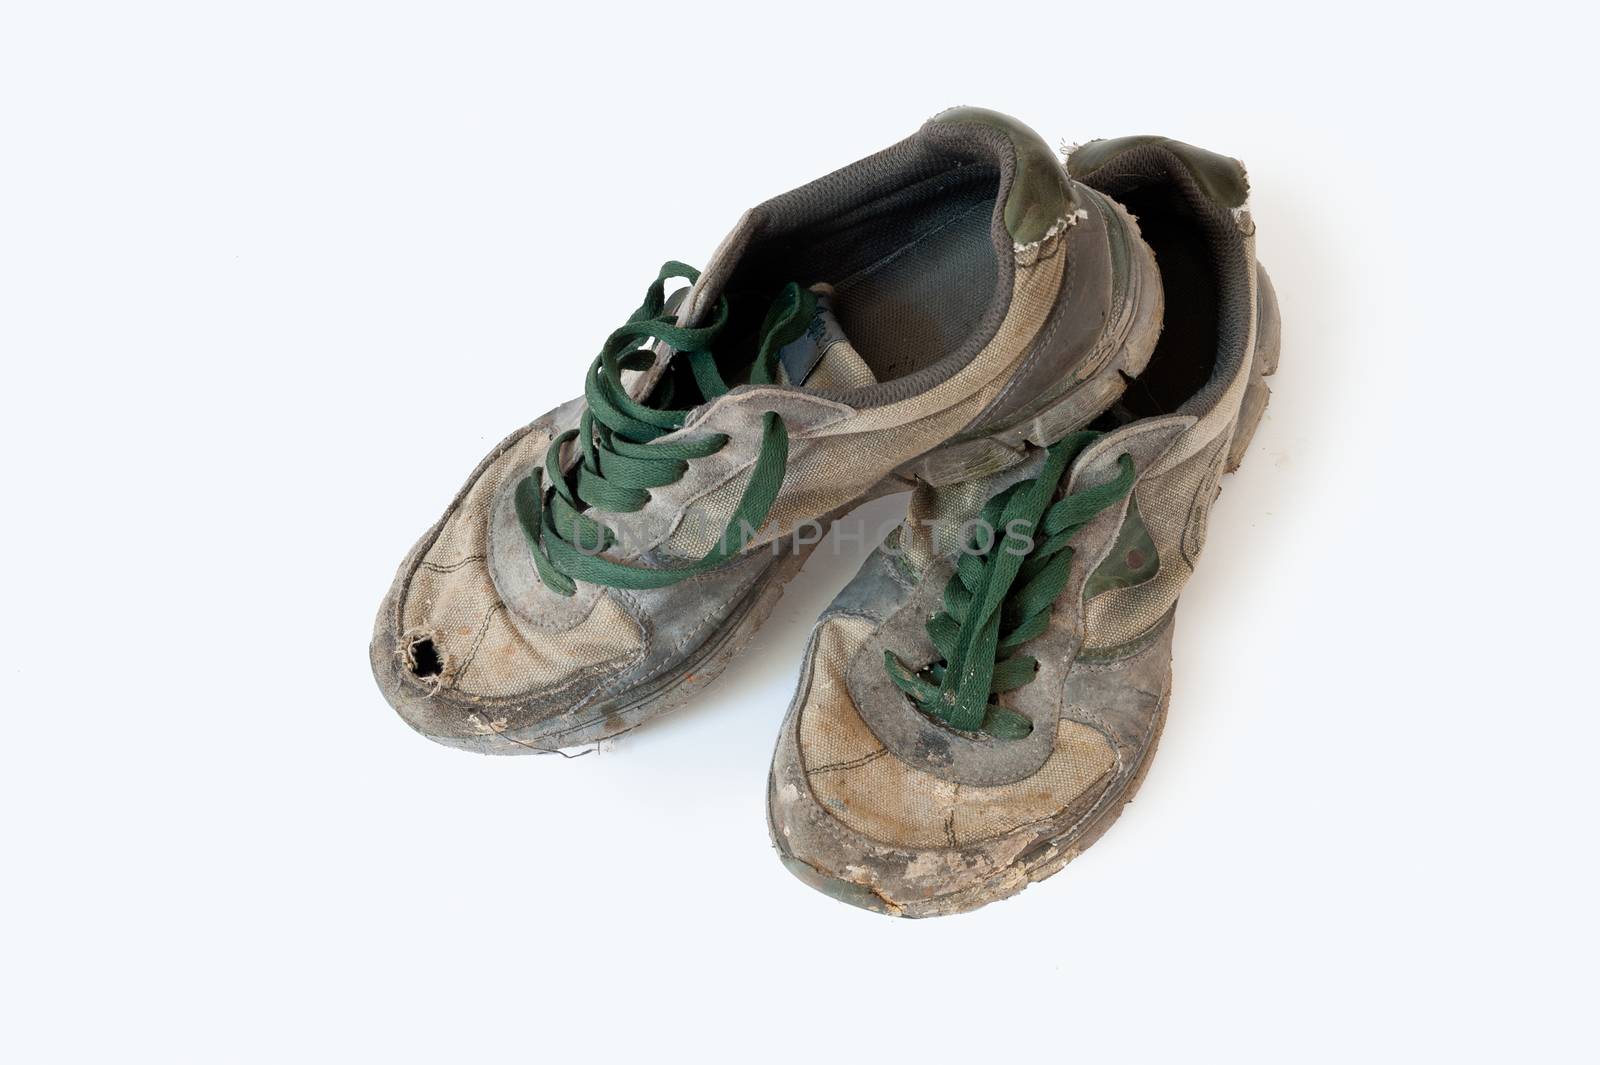 Old discarded sneakers with green shoelaces photographed against a white background